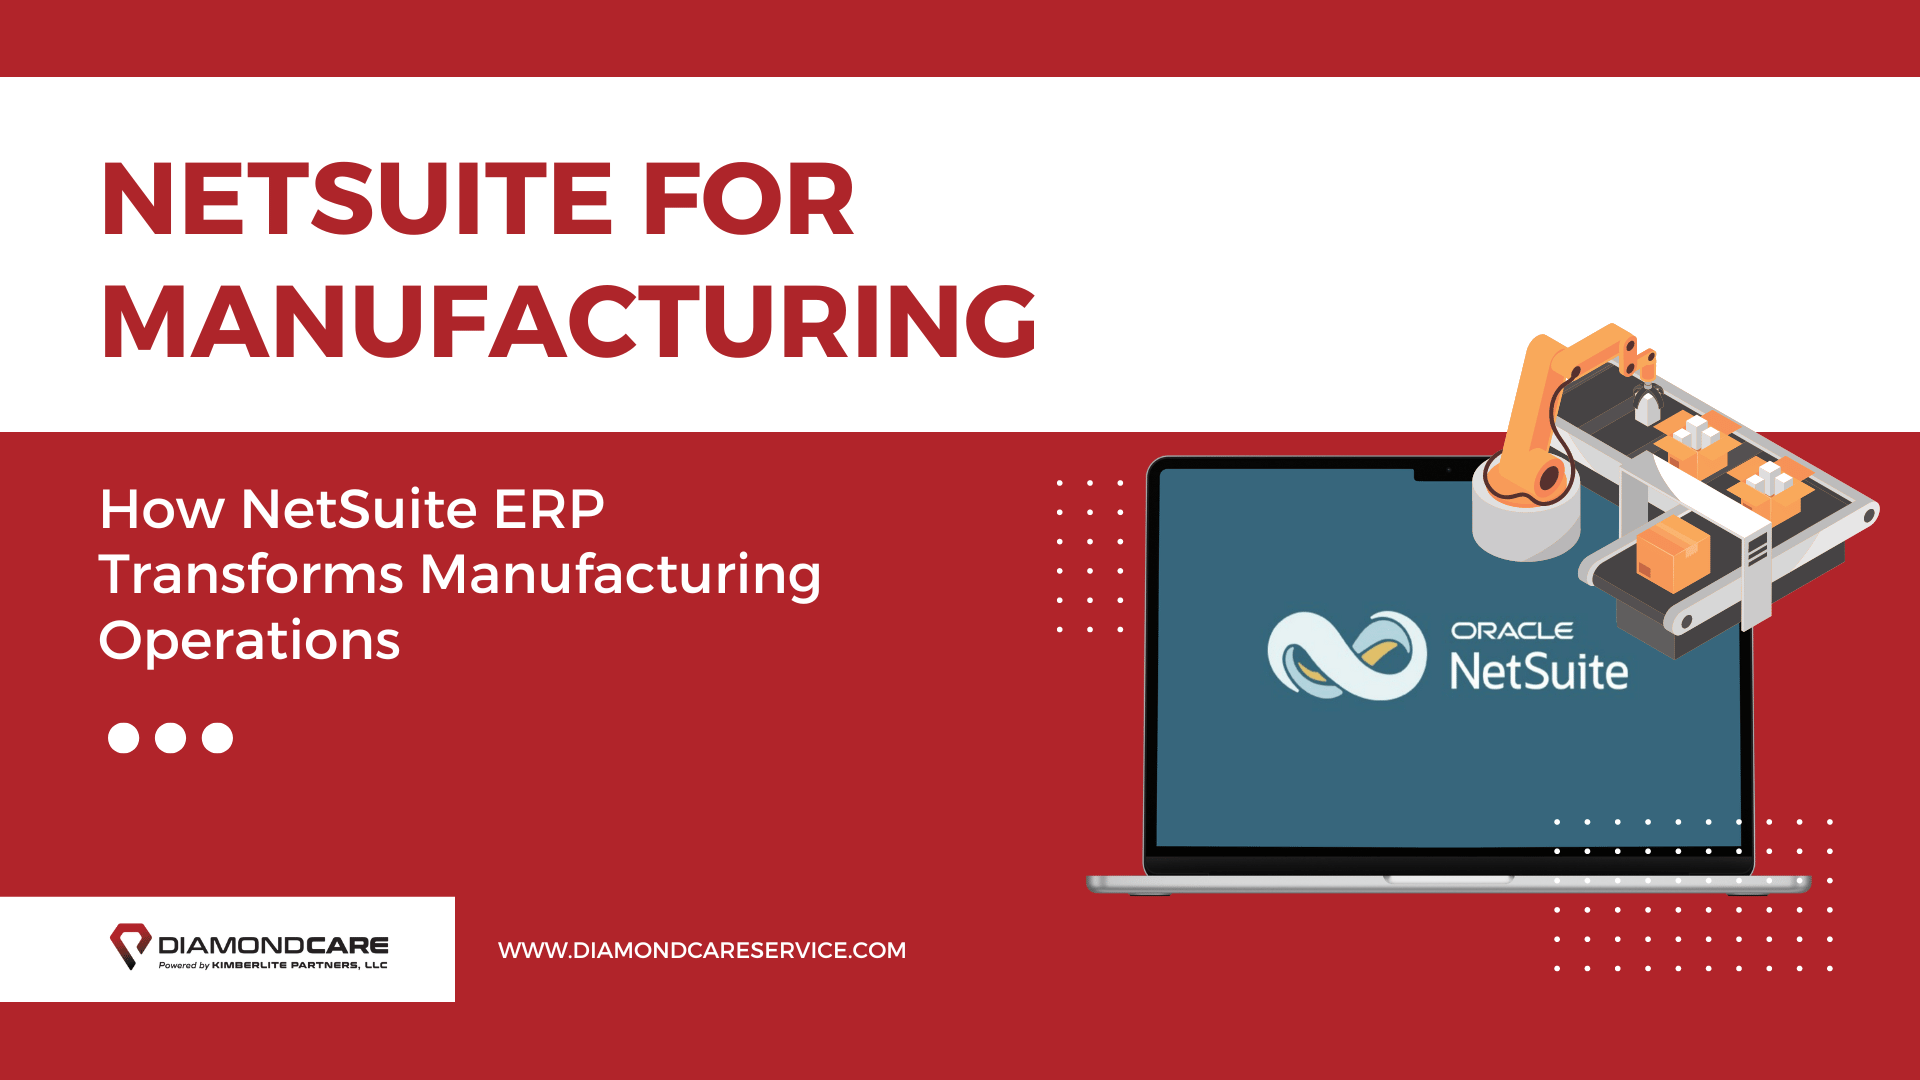 NetSuite for Manufacturing: How NetSuite ERP Transforms Manufacturing Operations